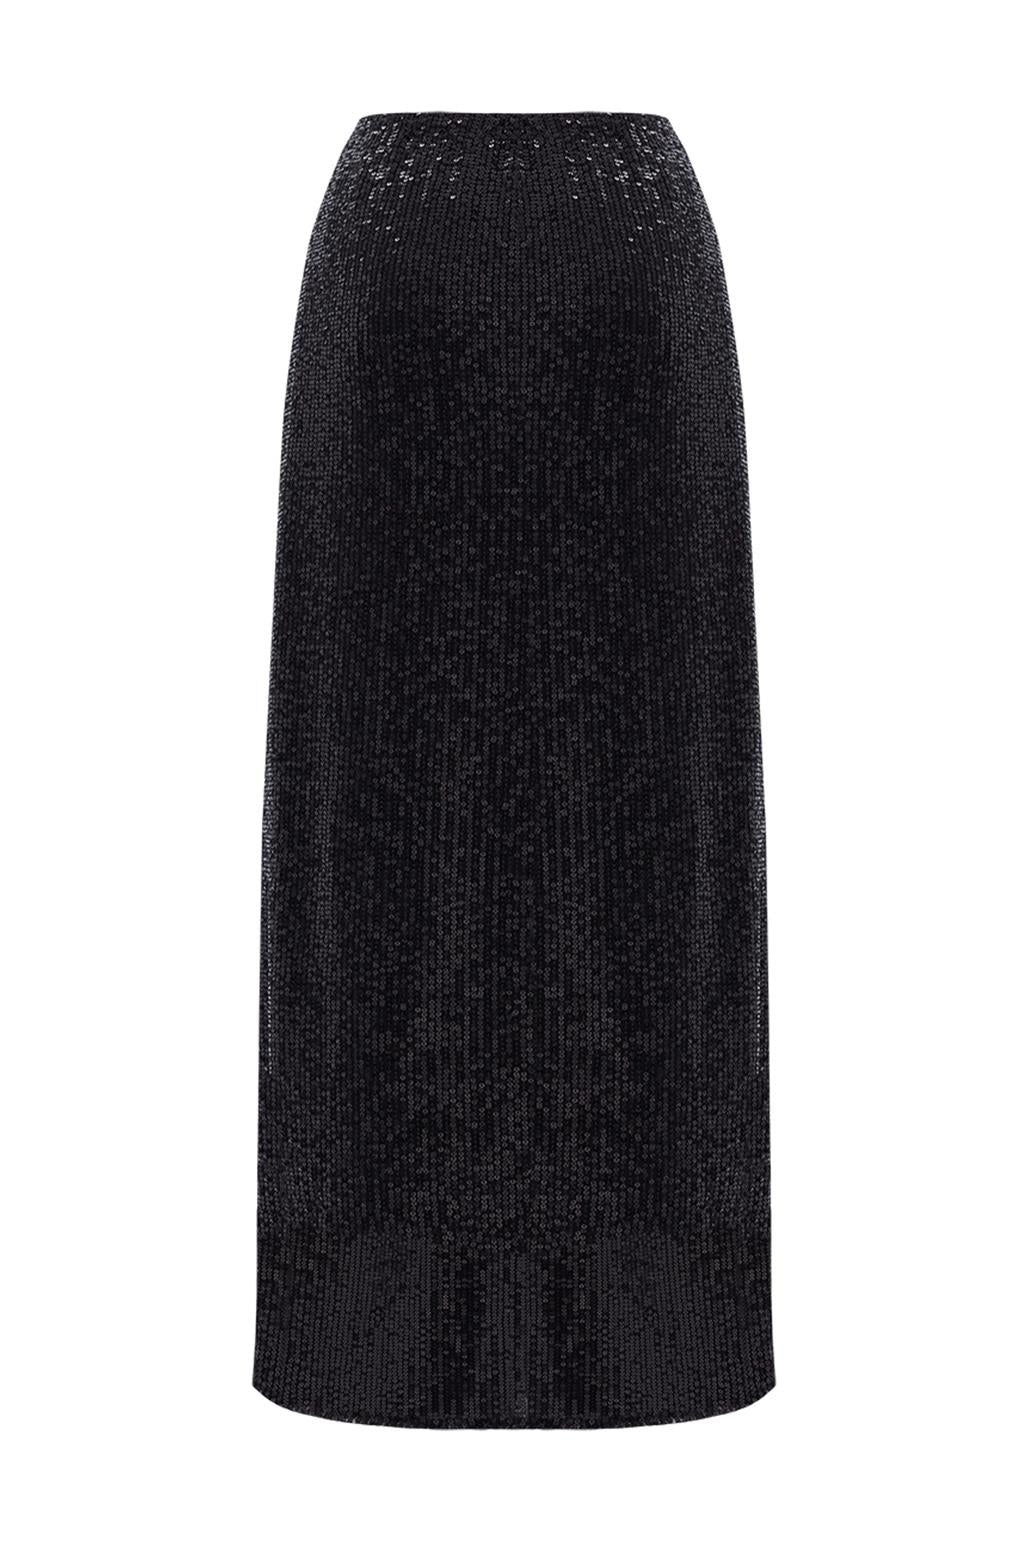 Sequin Embroidered Pencil Skirt Black